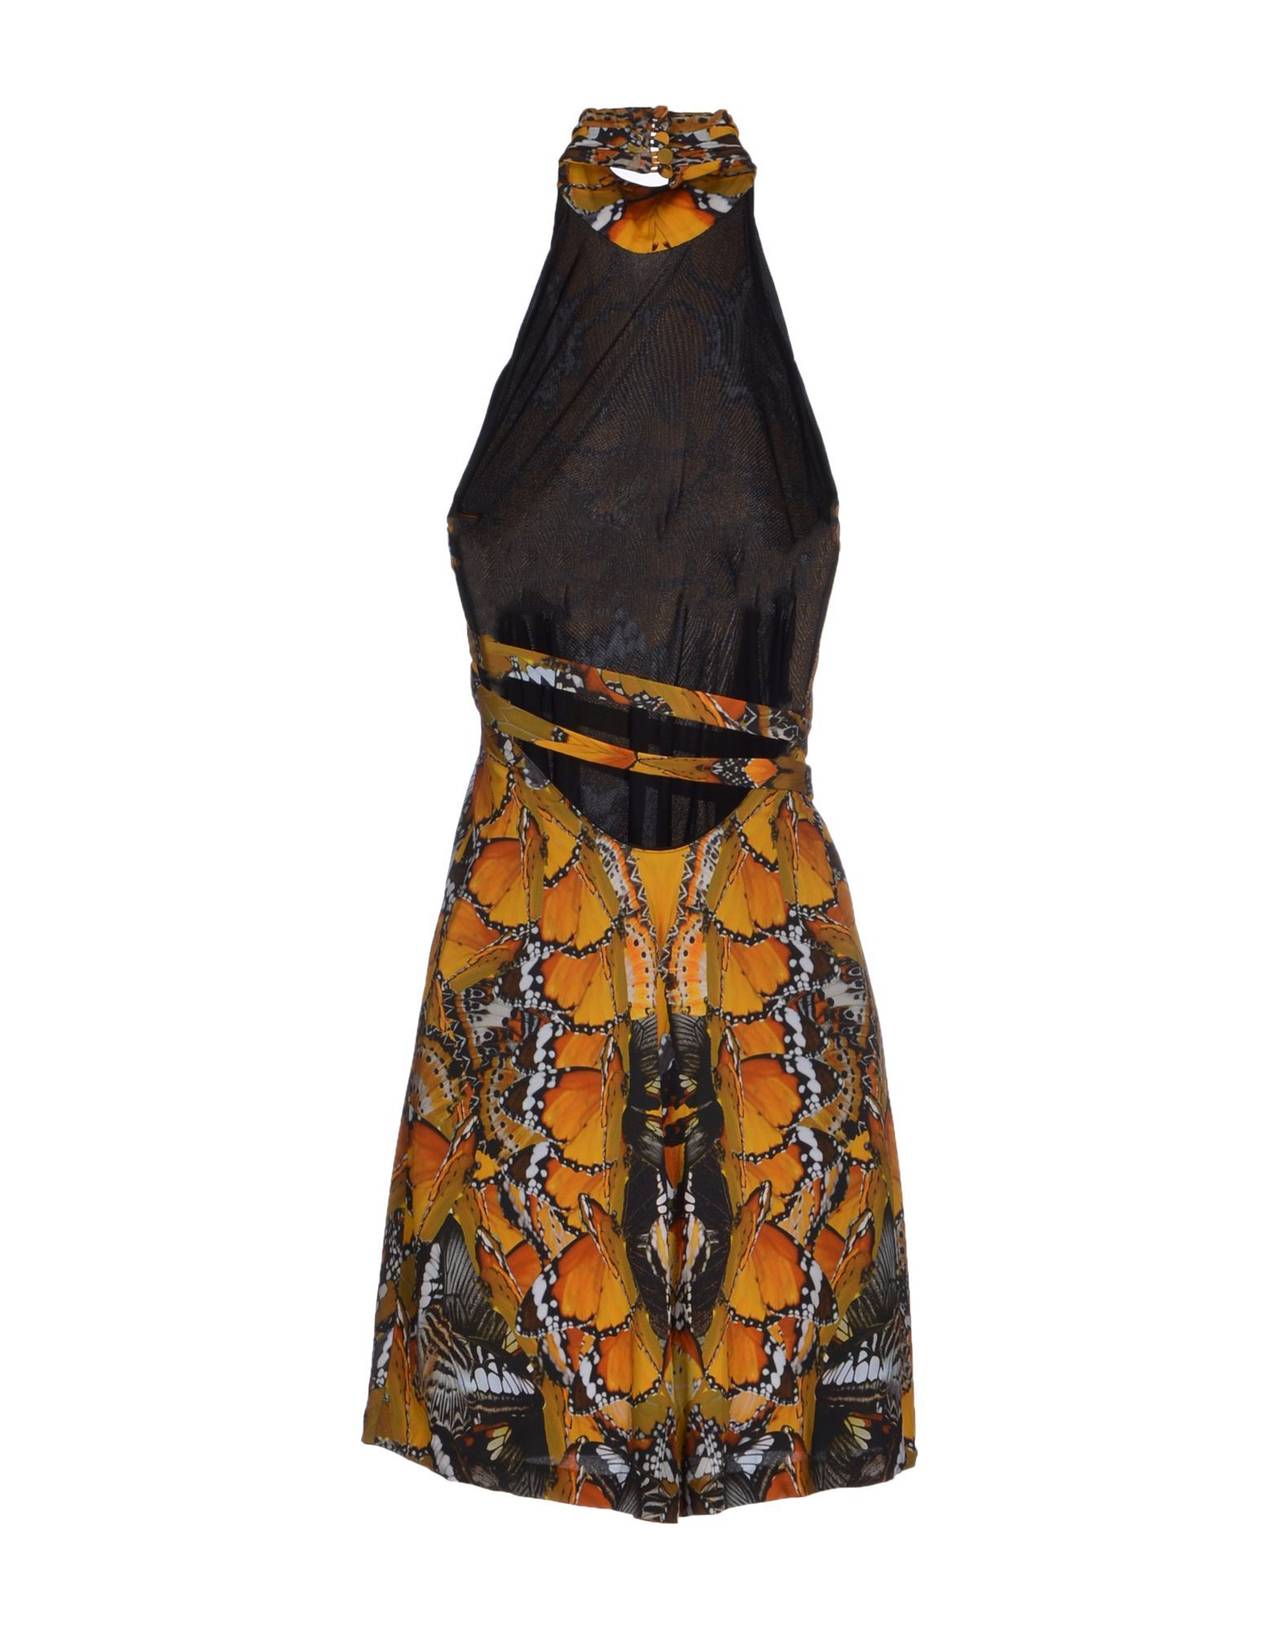 ICONIC ALEXANDER MсQUEEN  DRESS

S/S 2011  Collection

Butterfly print

IT Size 38 - US 2
   
Brand new, with tags!